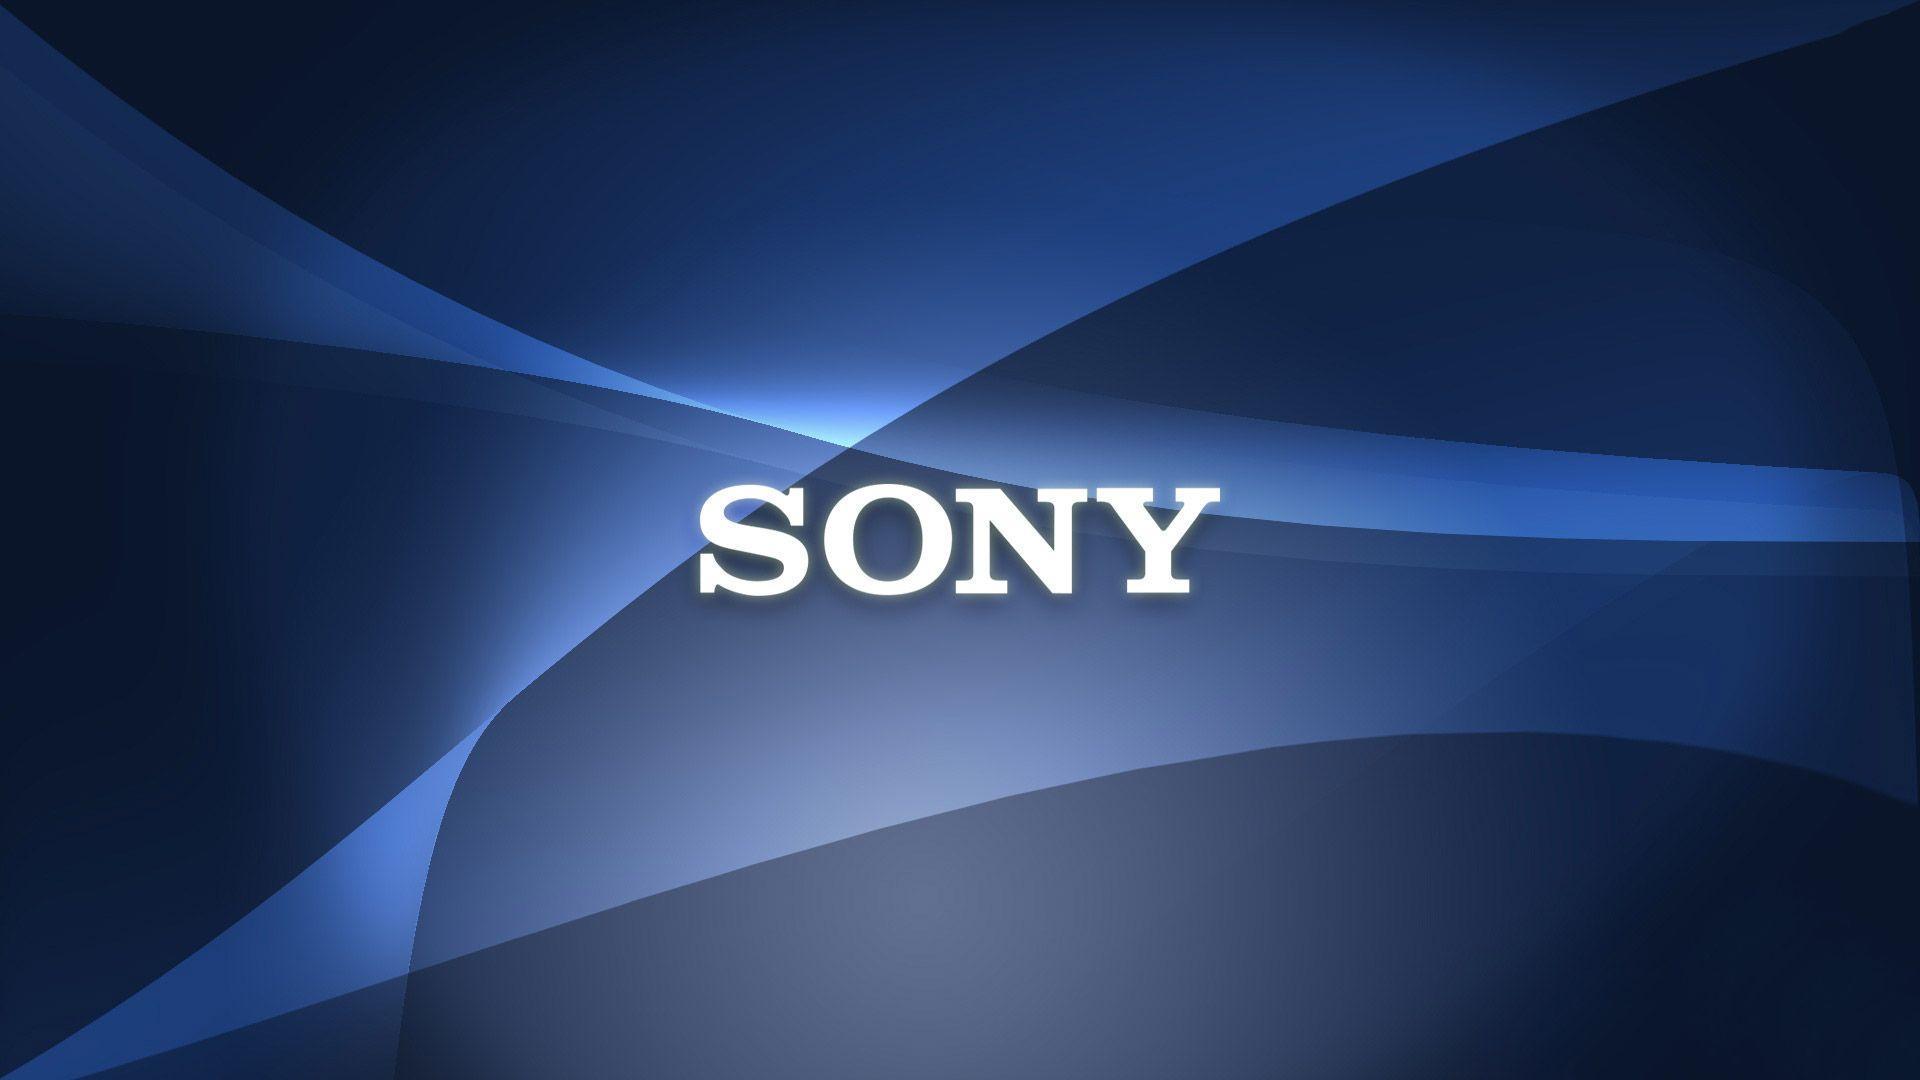 Who owns Sony